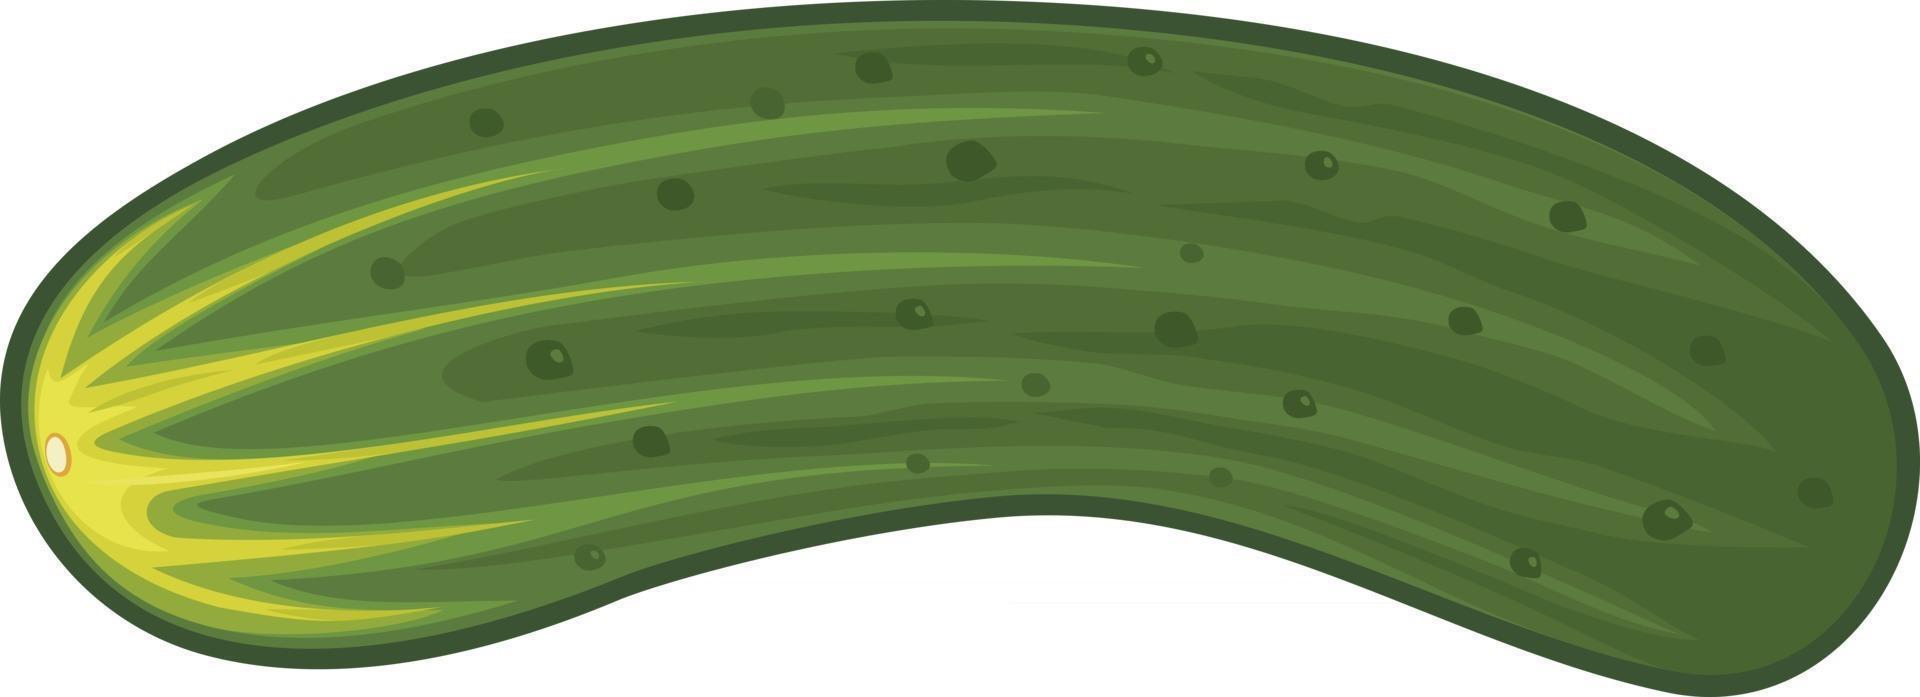 Cucumber Vegetable Icon vector